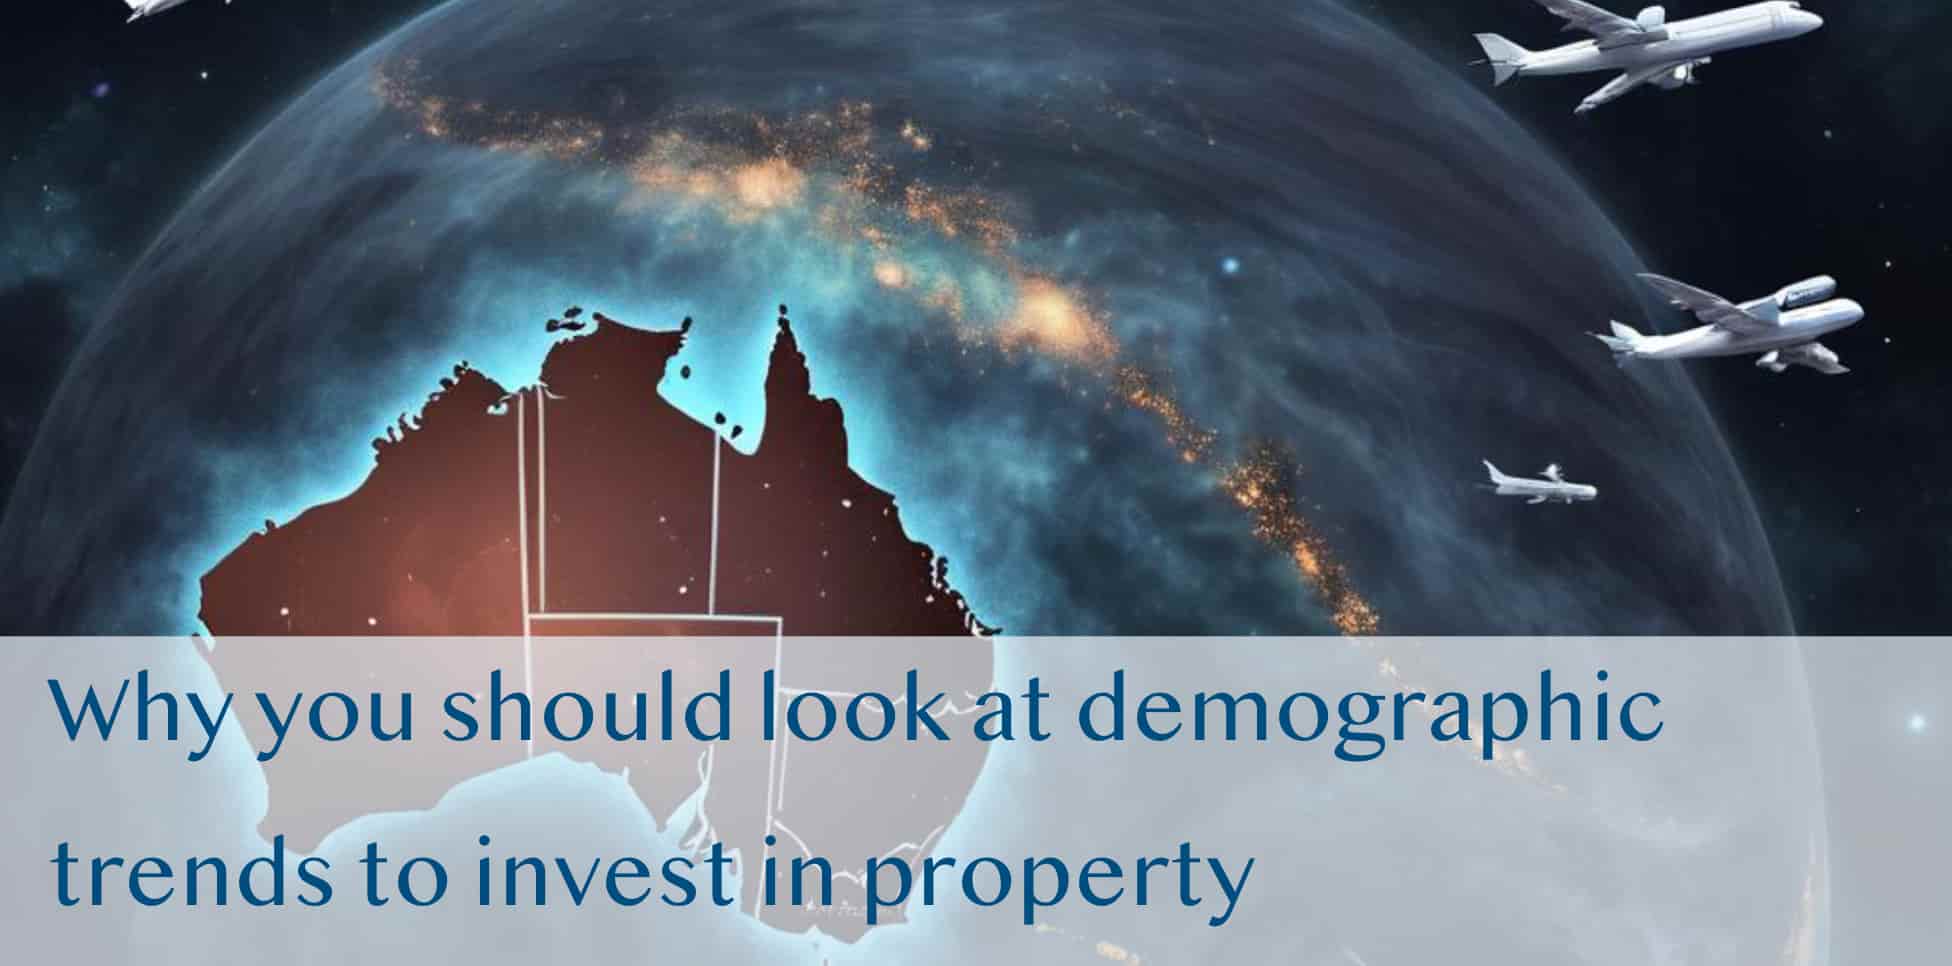 Why you should look at demographic trends to invest in property